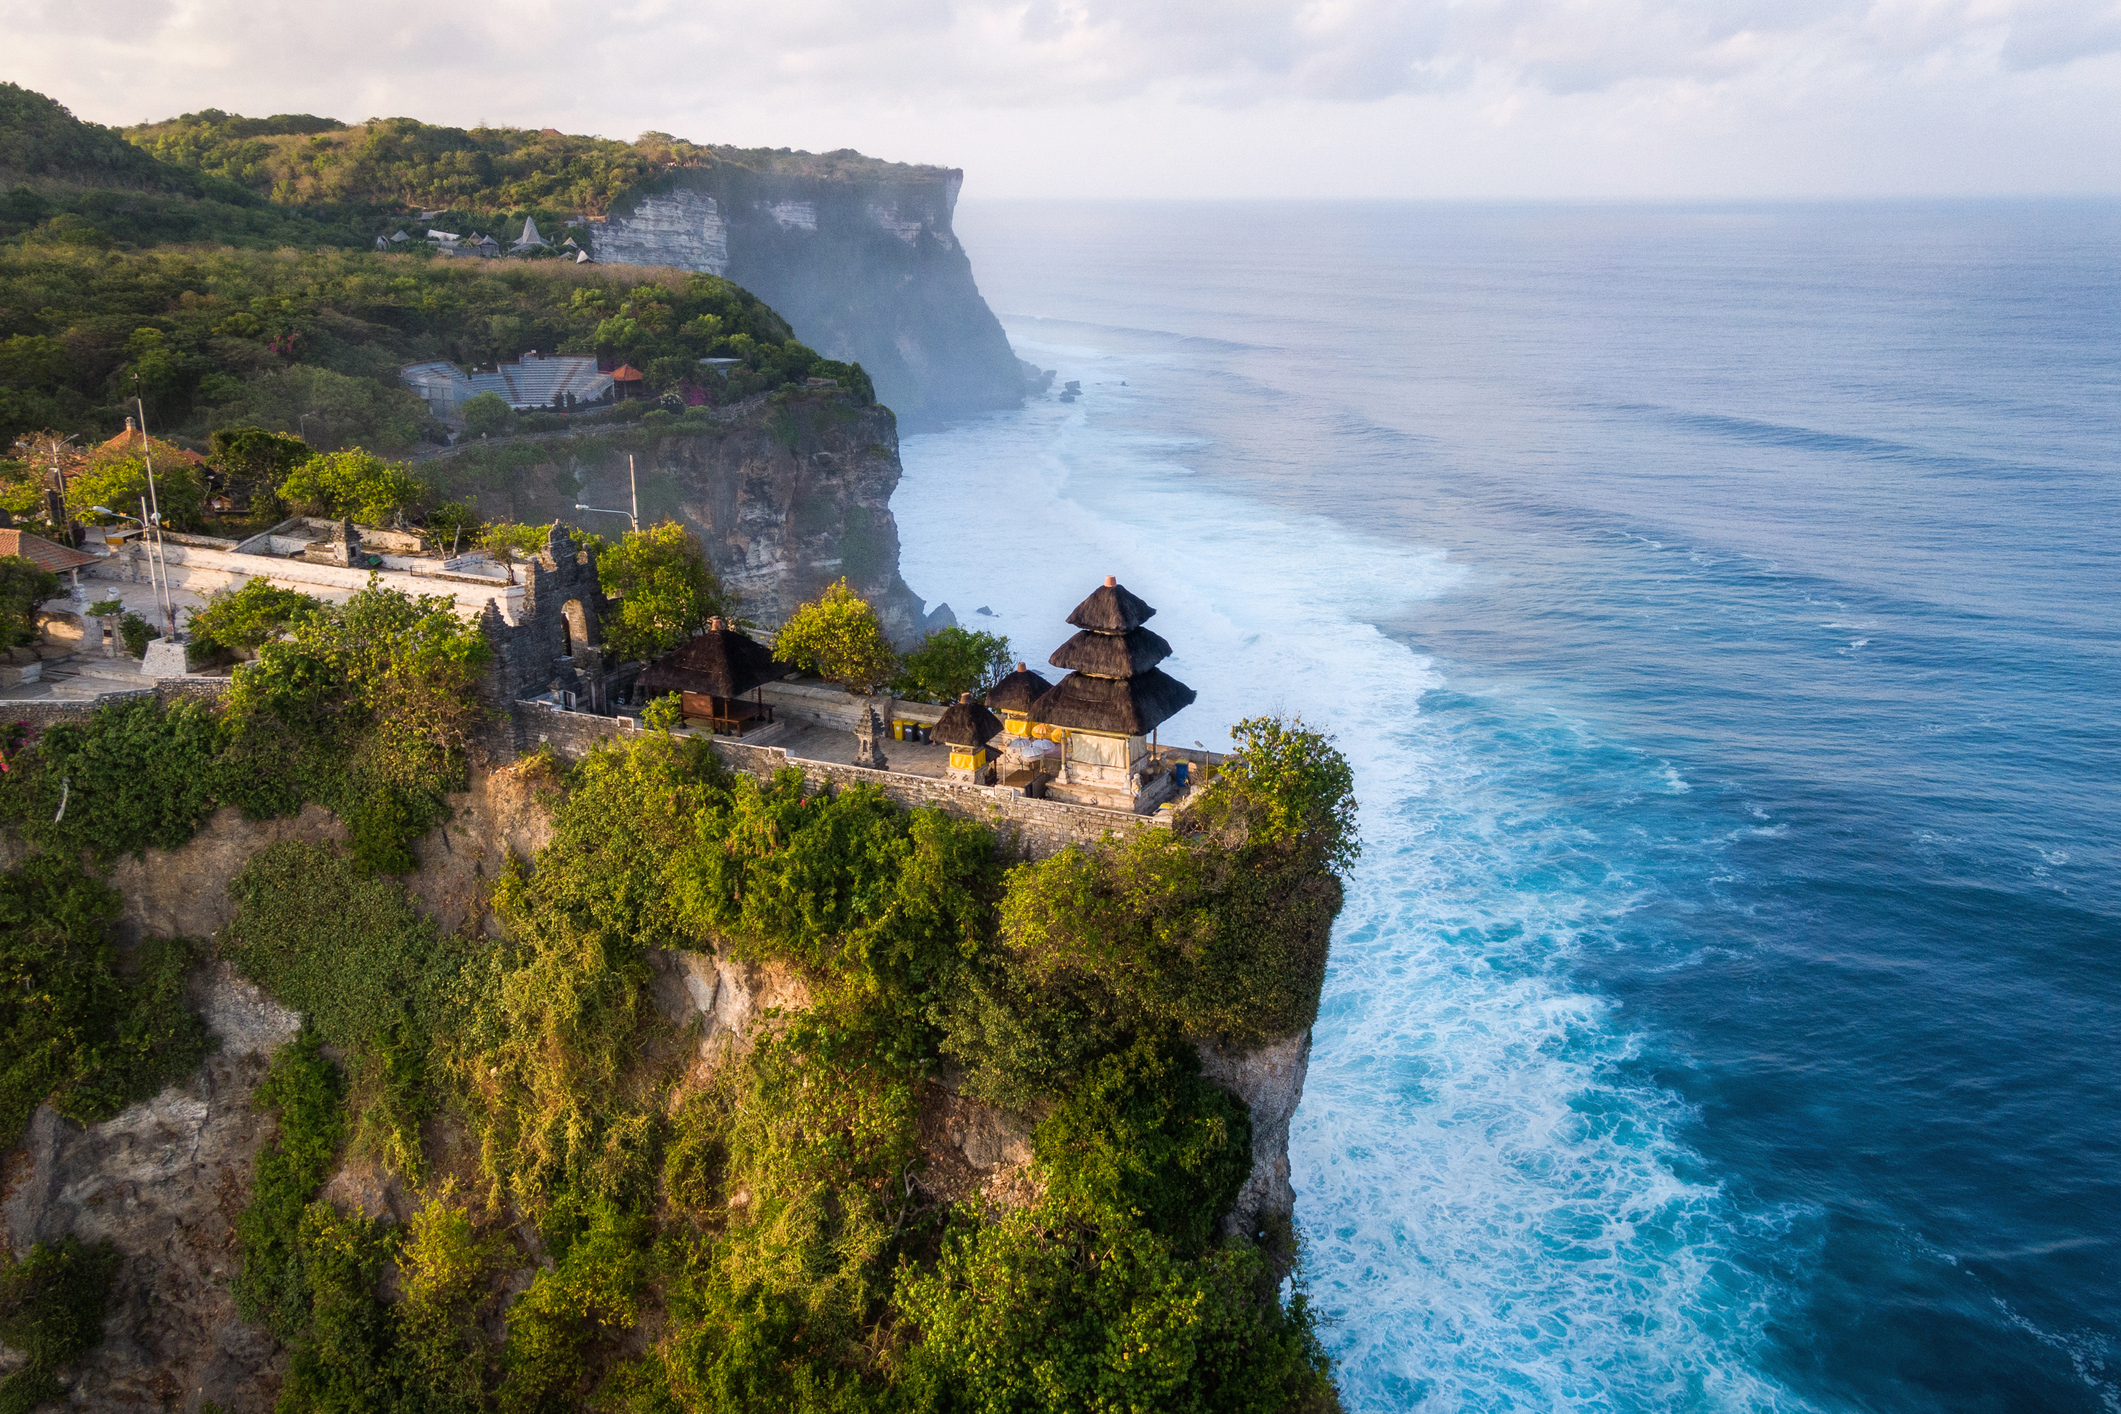 Bali to reopen to international tourists in September – Travel Weekly